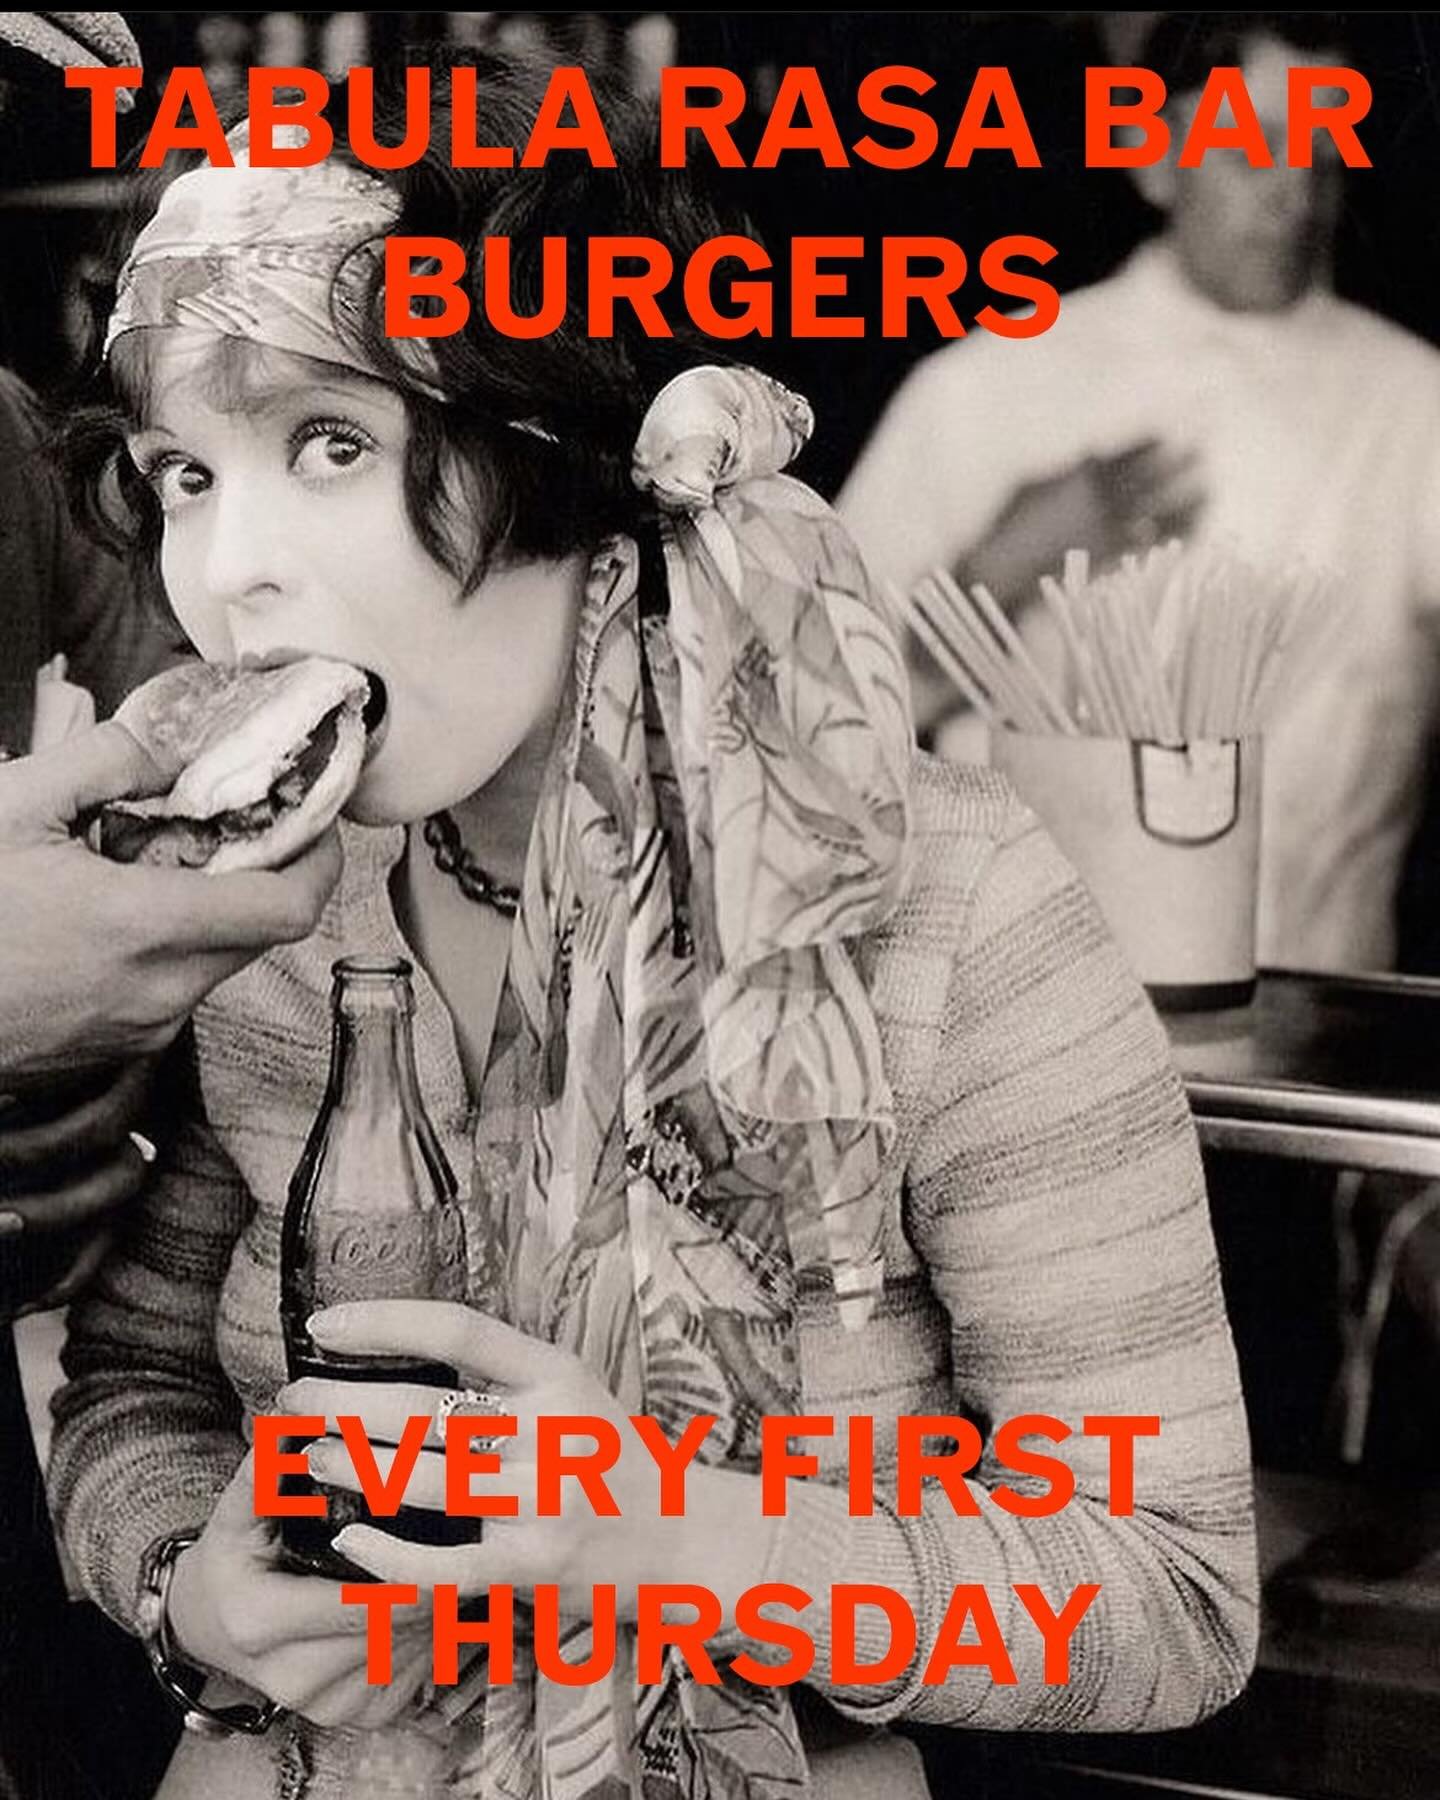 FIRST THURSDAYS at Tabula Rasa Bar! Fuel up with Burgers by Brent from 5pm till sold out, and then boogie down with @sherryyounge on the decks with a chilled red in hand! #tabularasabar #firstthursdays #burgersandvinyl